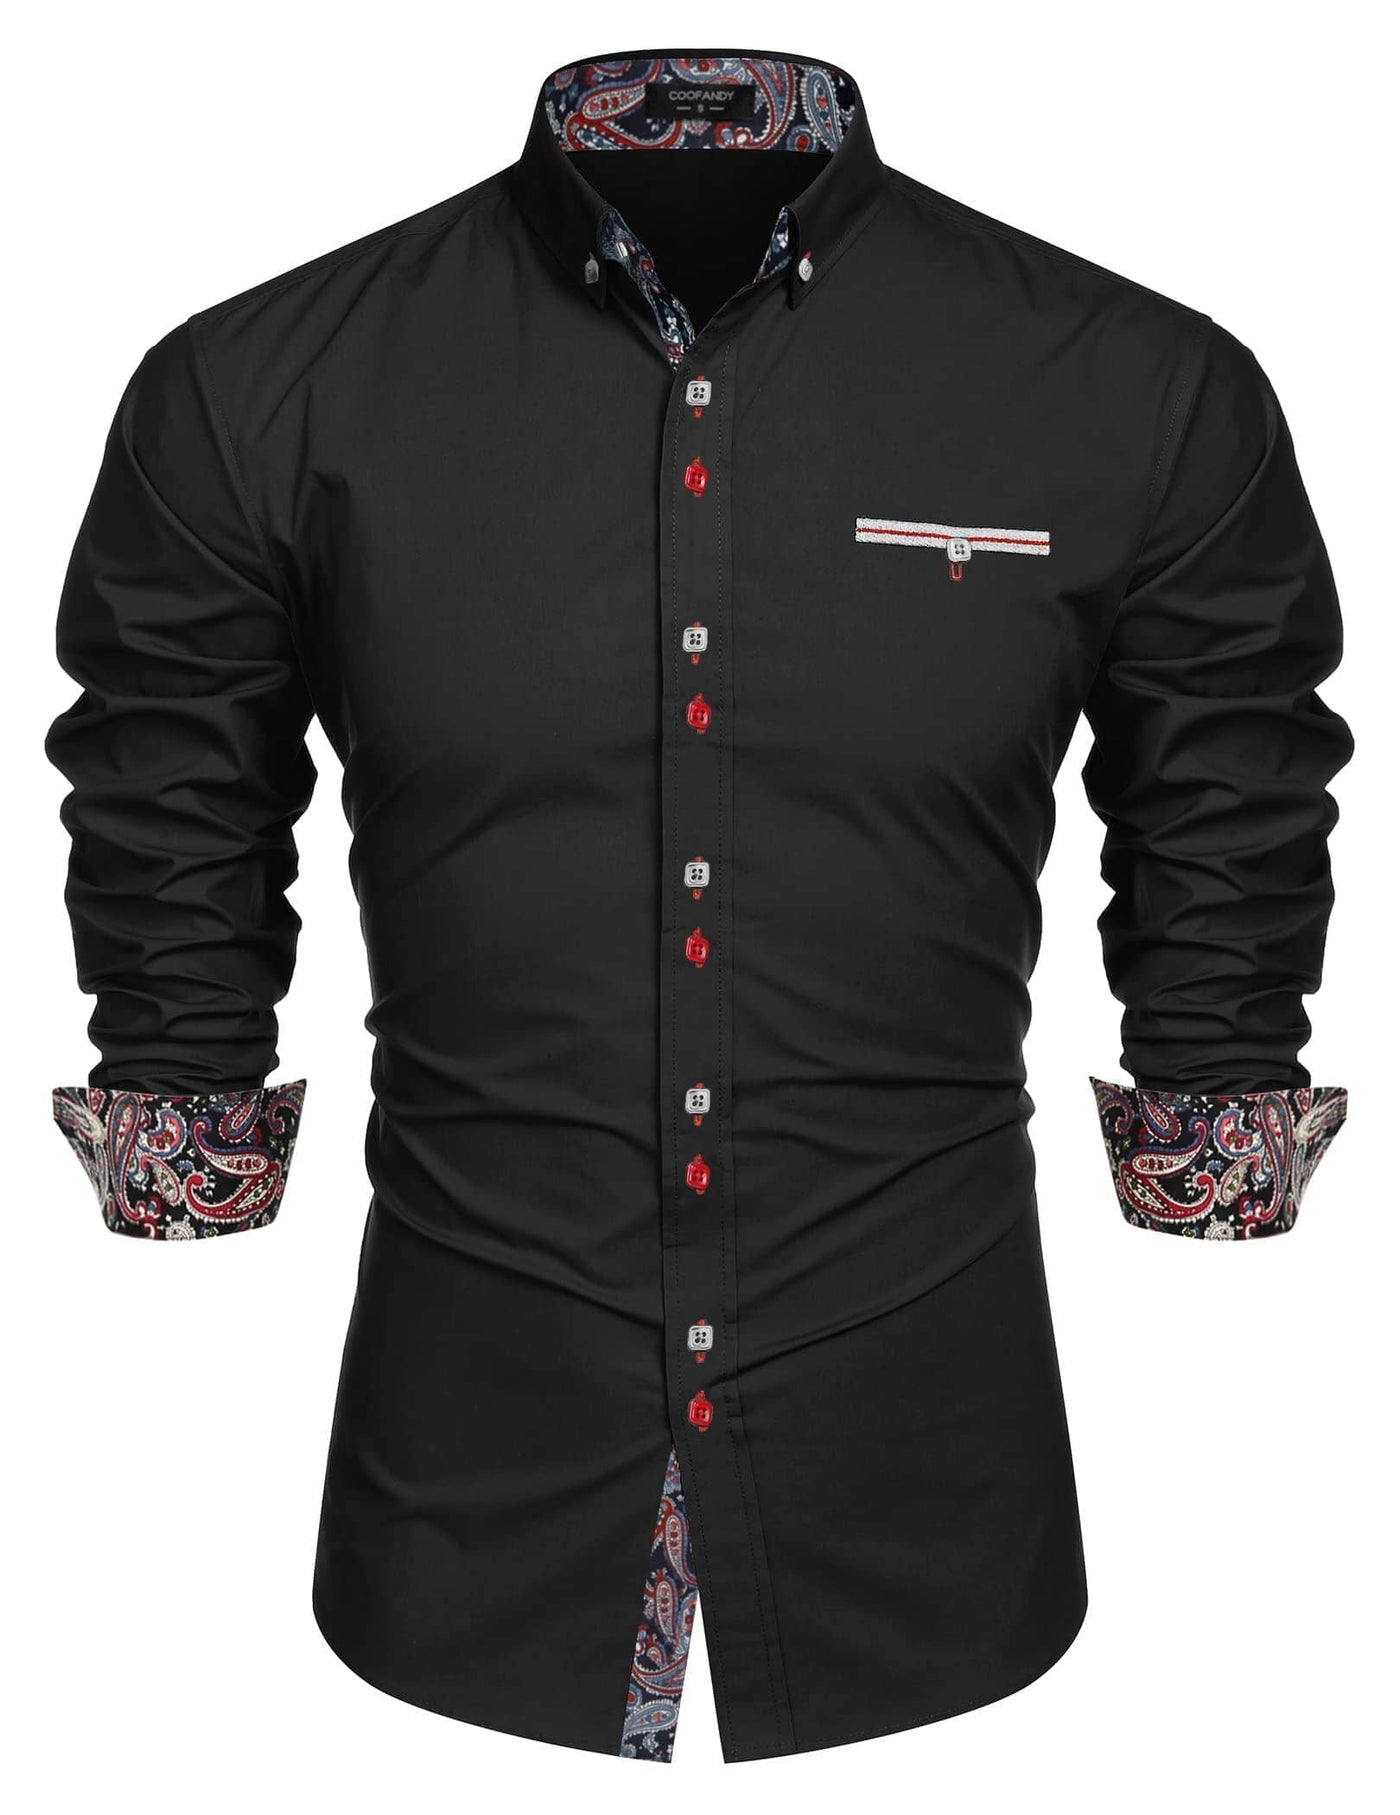 Coofandy Dress Button Down Shirts (US Only) Shirts coofandy Black S 